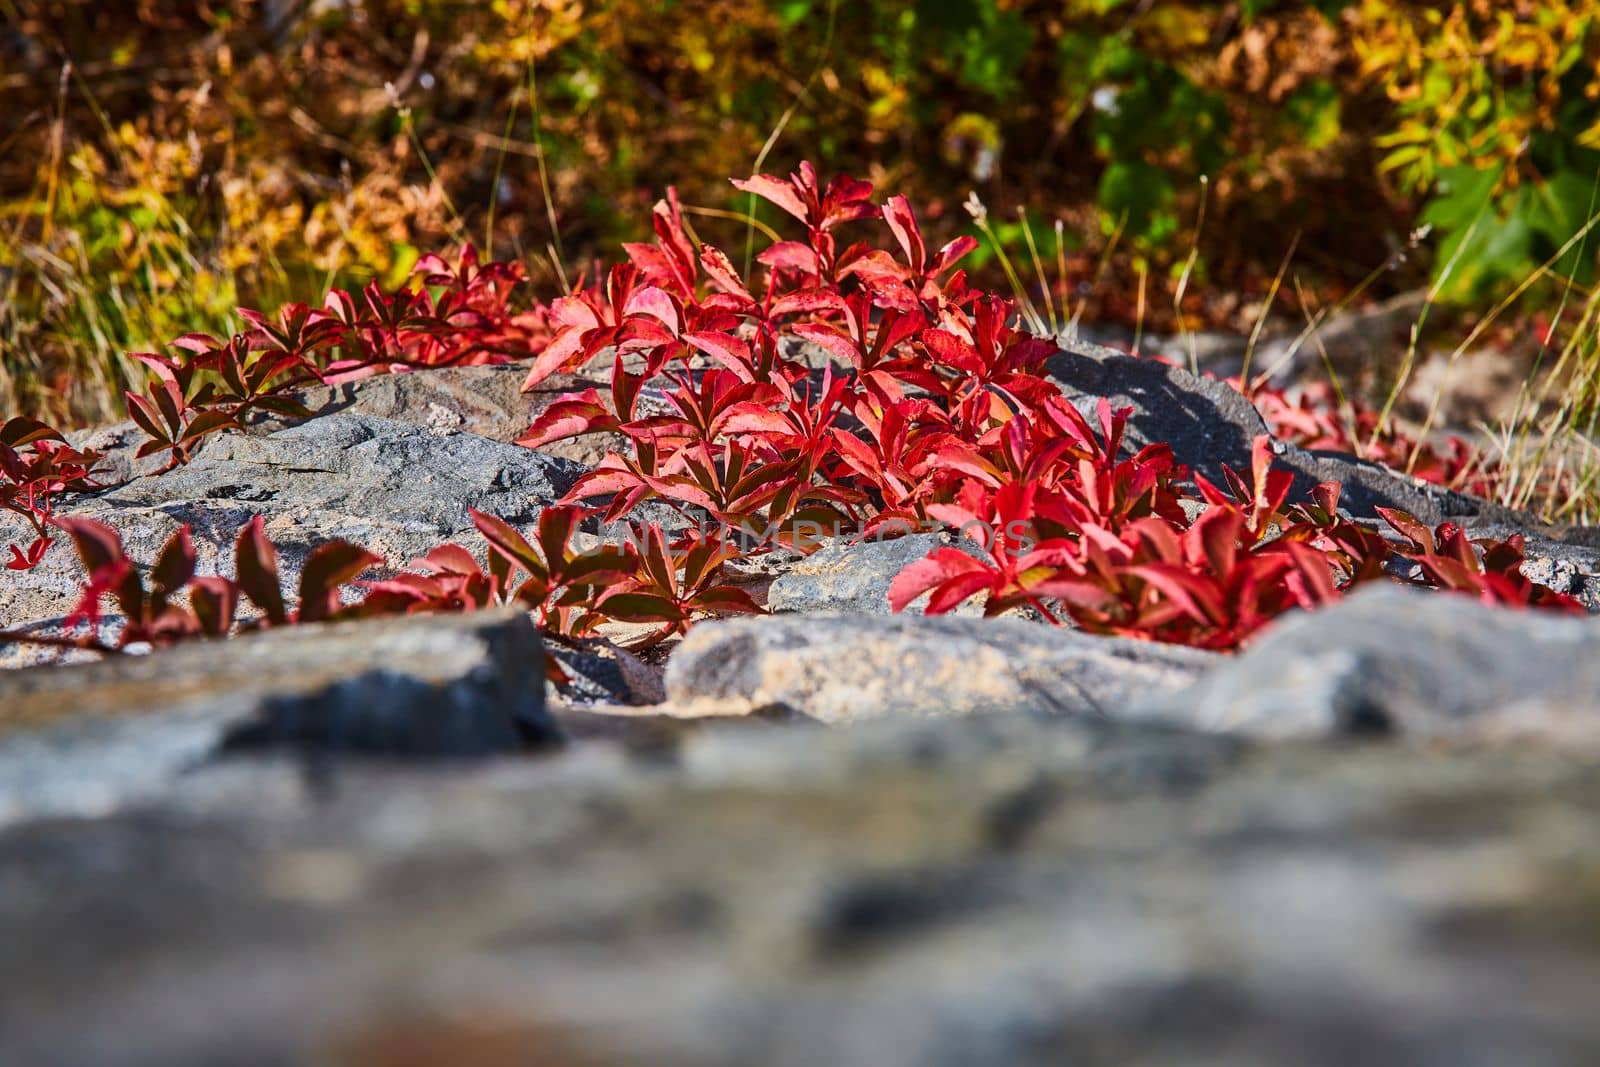 Looking down stone wall with red-leafed vines in fall growing up by njproductions